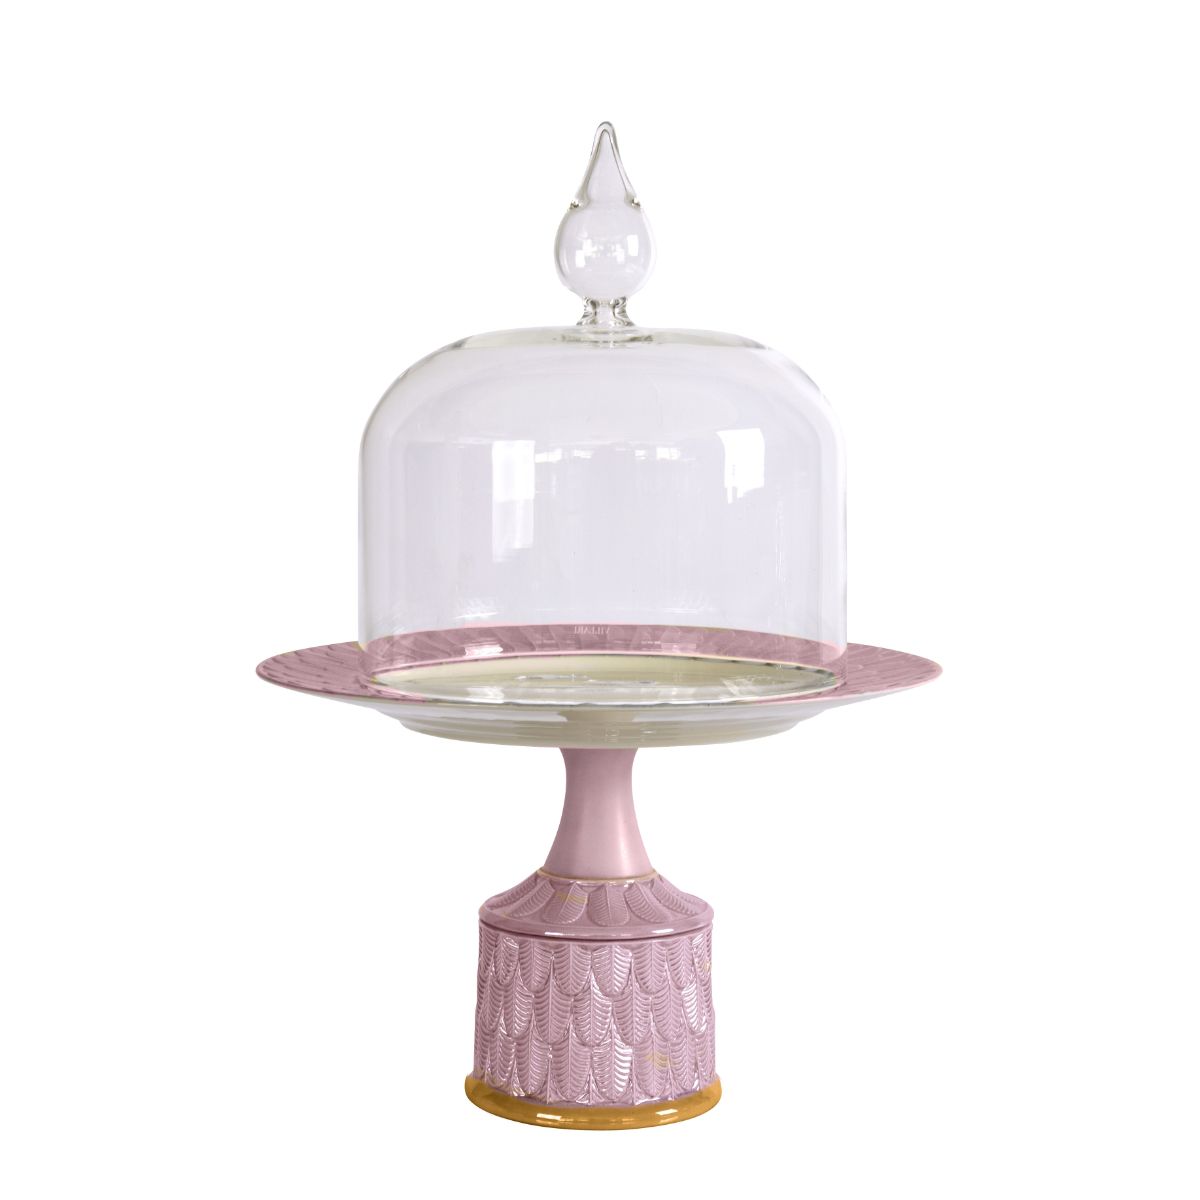 Peacock Lilac & Gold Large Cake Stand With Cloche